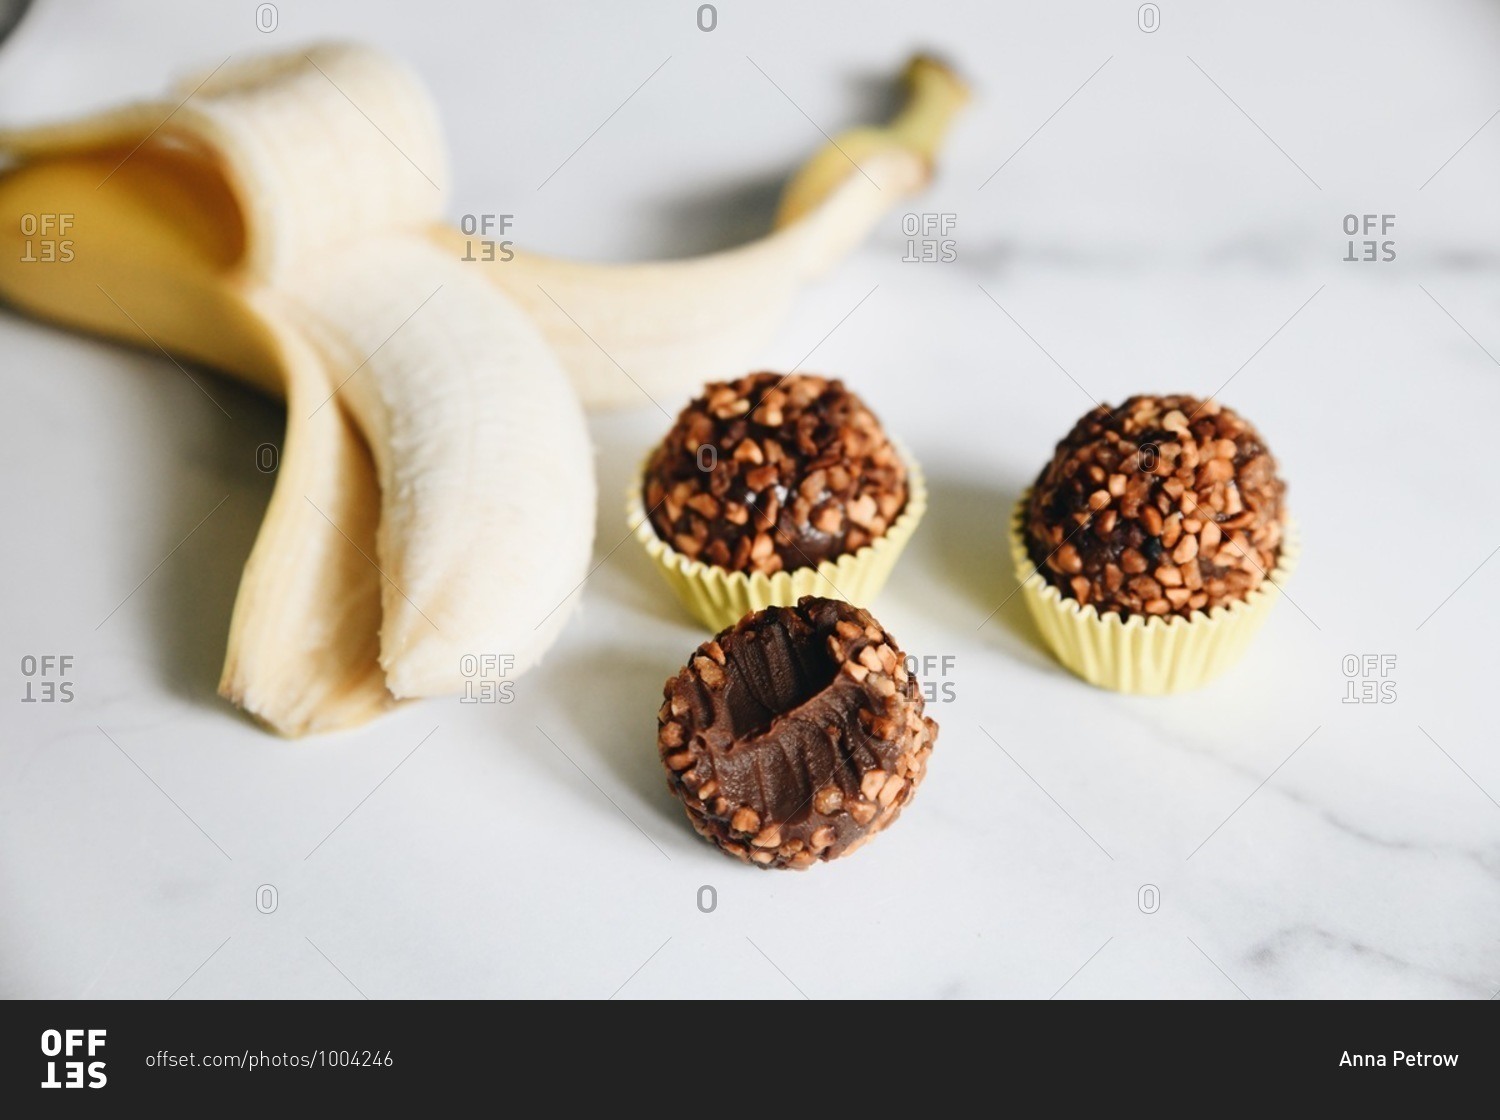 Bananas and nut brigadeiro missing a bite on marble surface